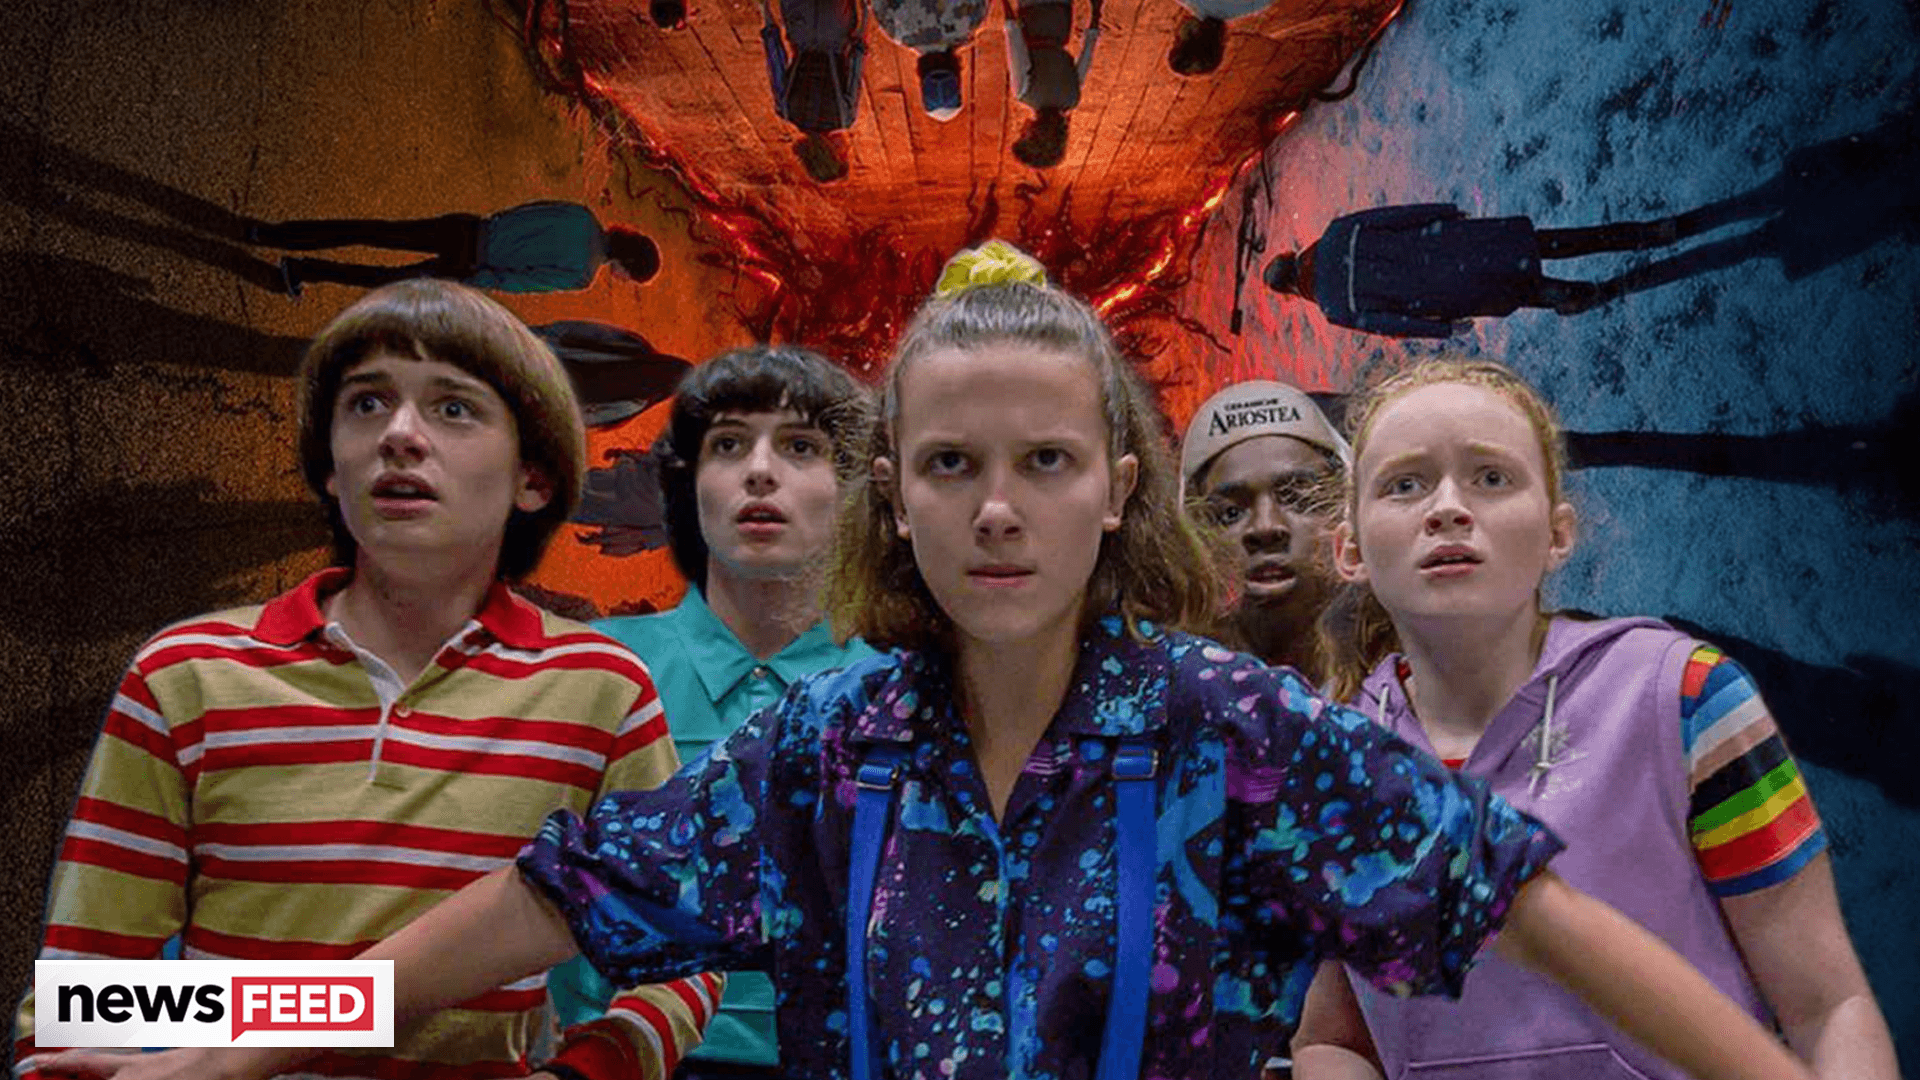 Stranger Things' Season 5: Release Date, Episodes and Spoilers